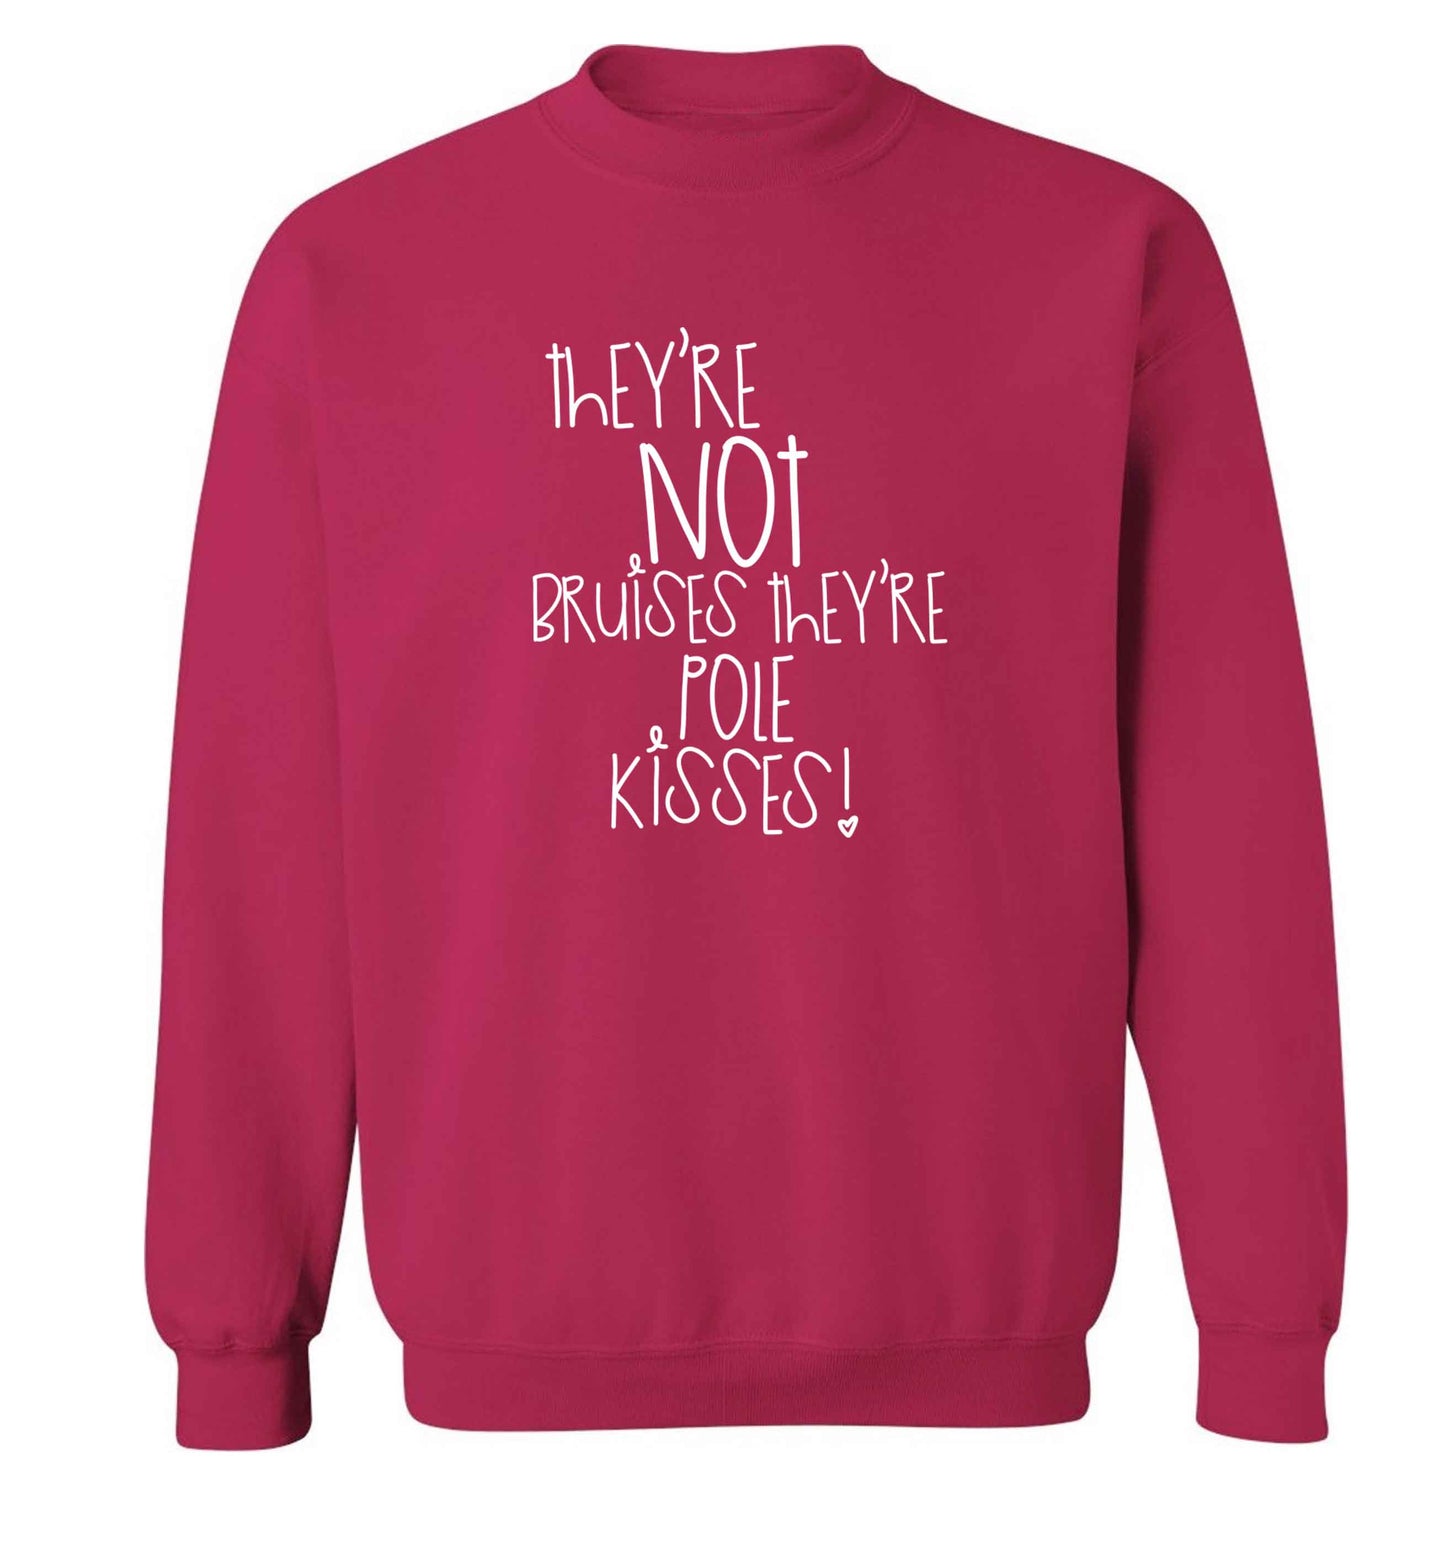 They're not bruises they're pole kisses adult's unisex pink sweater 2XL